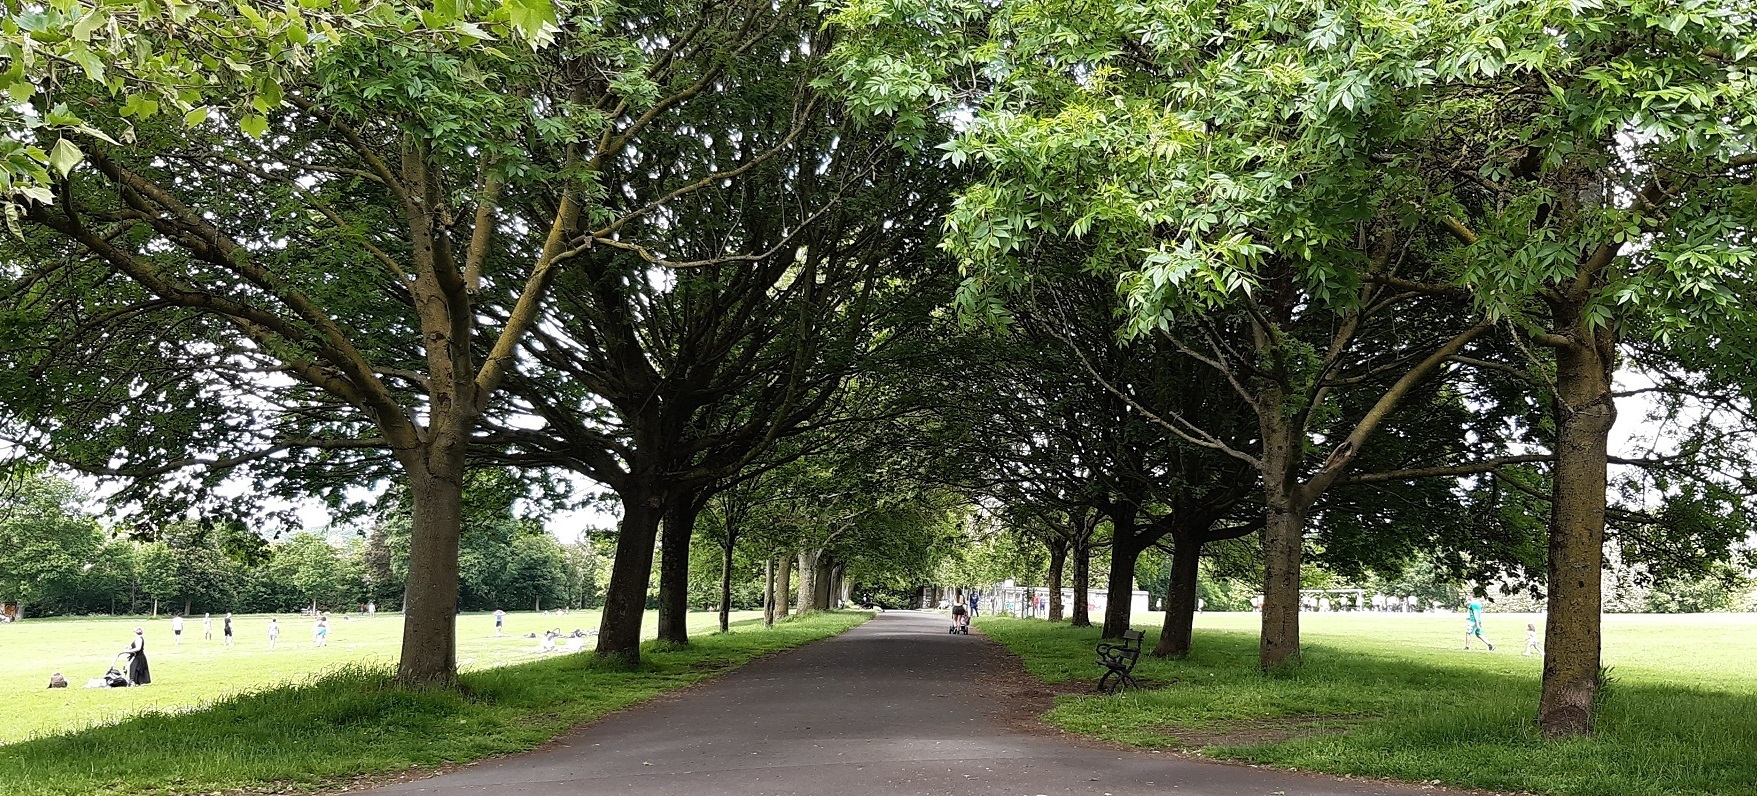 Tree lined path in a park